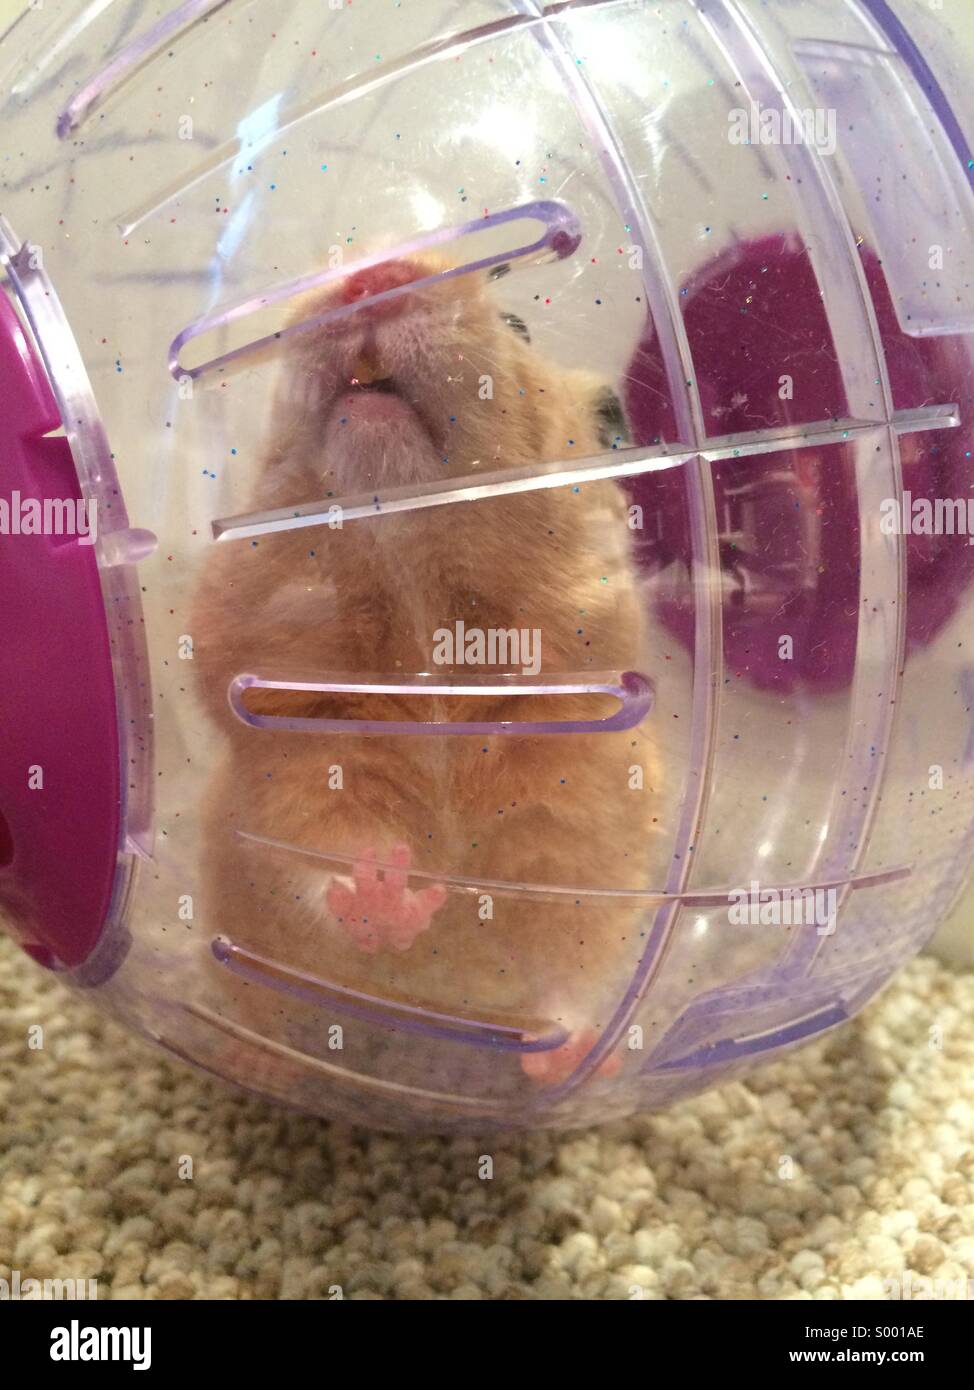 Hamster exerting in a ball Stock Photo